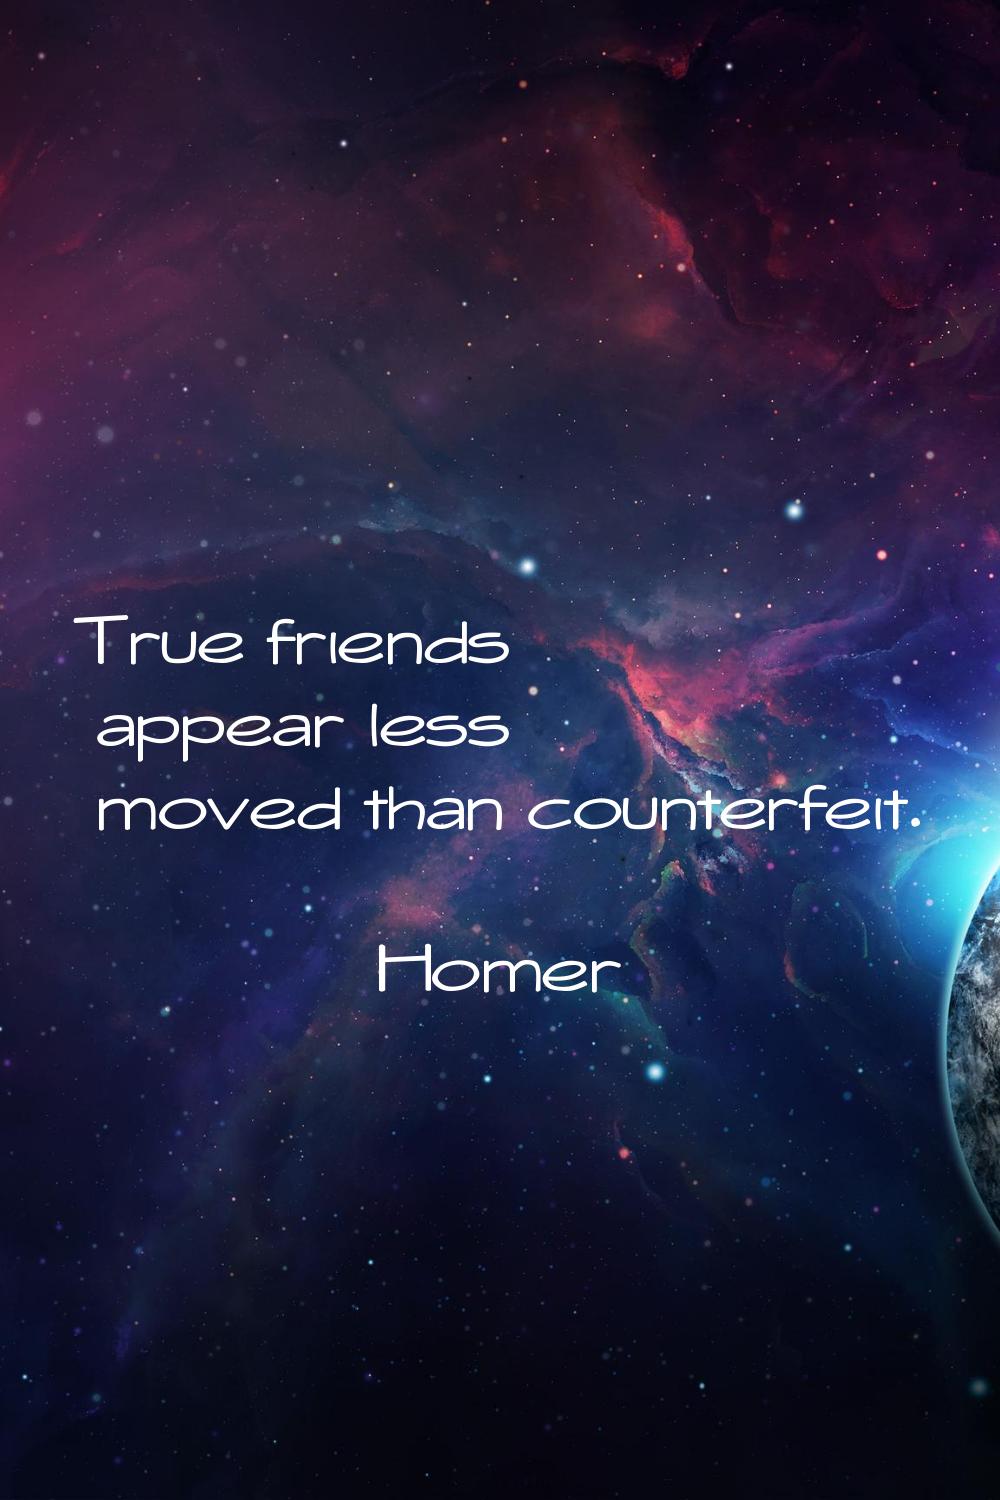 True friends appear less moved than counterfeit.